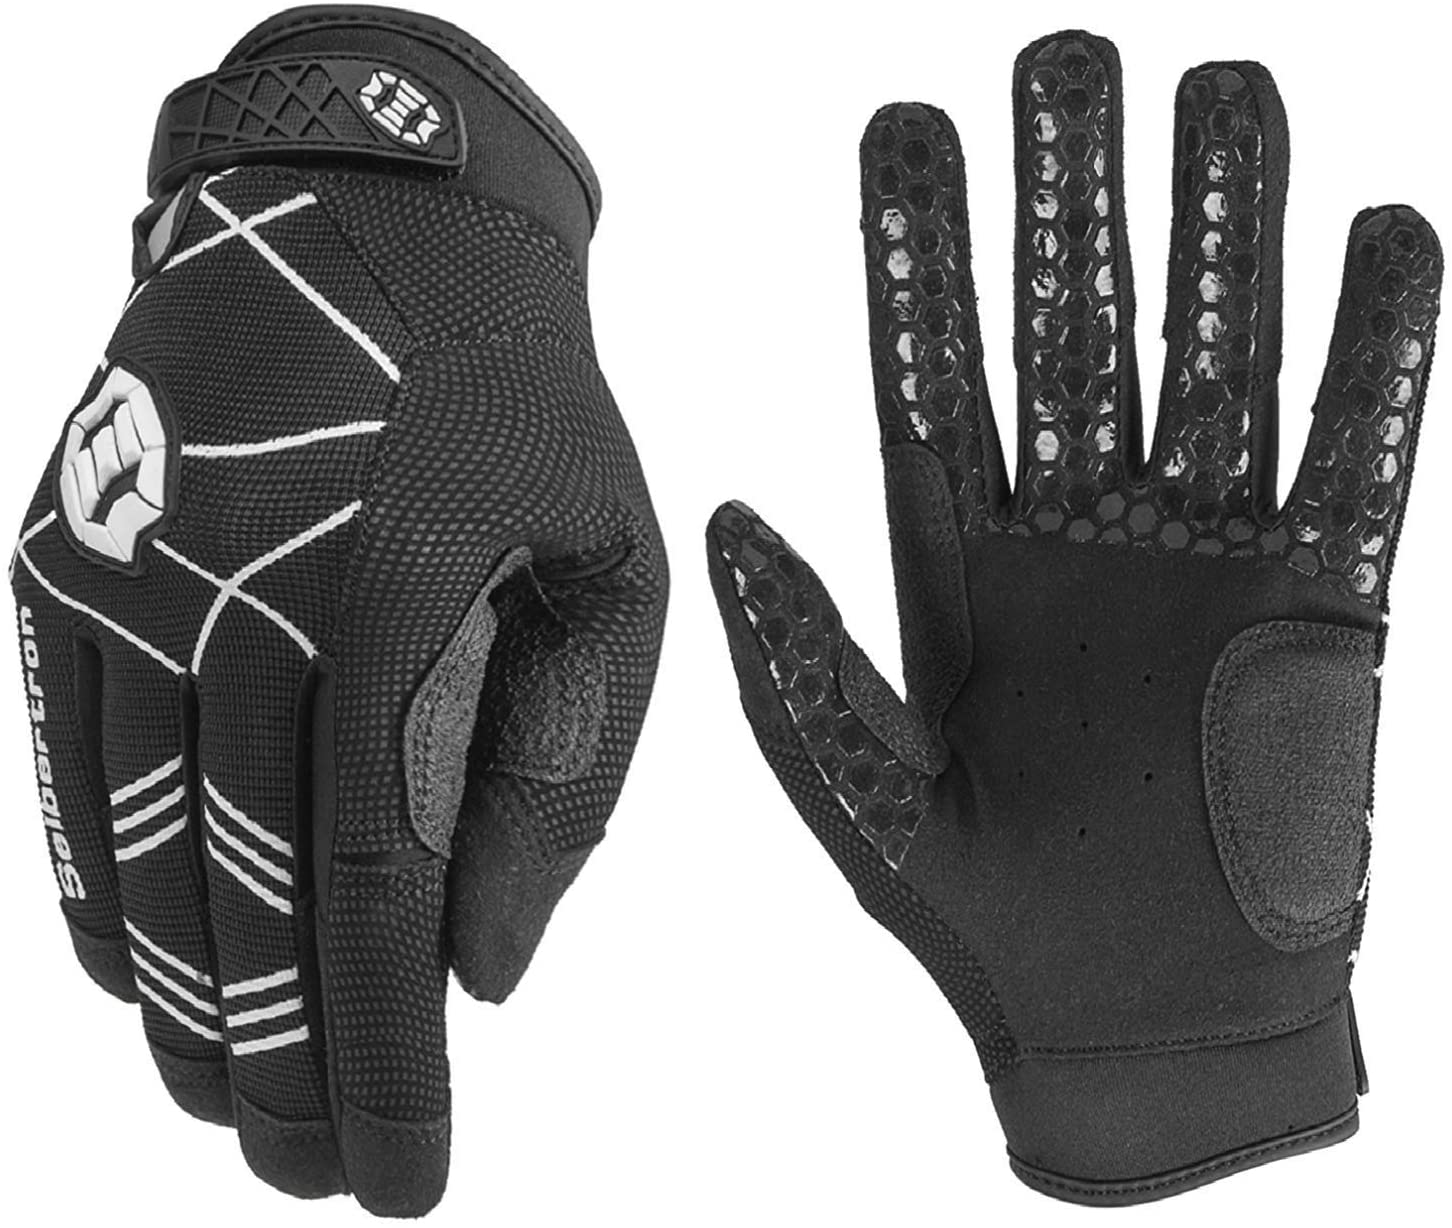 Seibertron B-A-R PRO 2.0 Signature Baseball/Softball Batting Gloves Super Grip Finger Fit for Adult and Youth (SIZE S) - e4cents